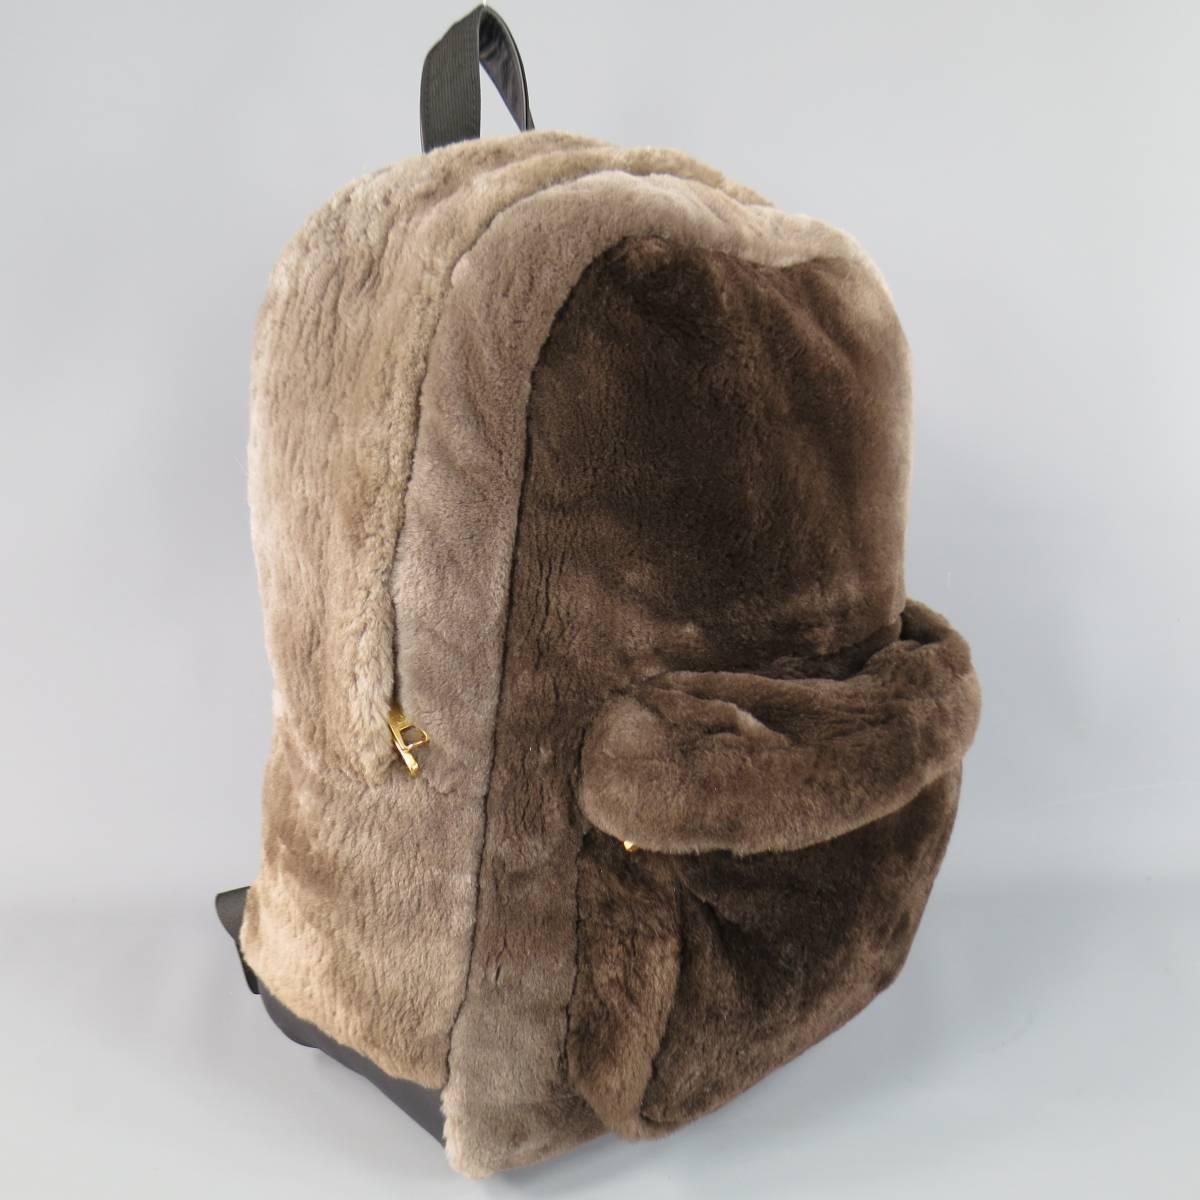 This fabulous and rare MARC JACOBS backpack comes in a multi-tonal taupe brown soft beaver fur and features a double yellow gold tone top zip closure, frontal zip patch pocket, and black leather back panel. Made in USA. Retails at